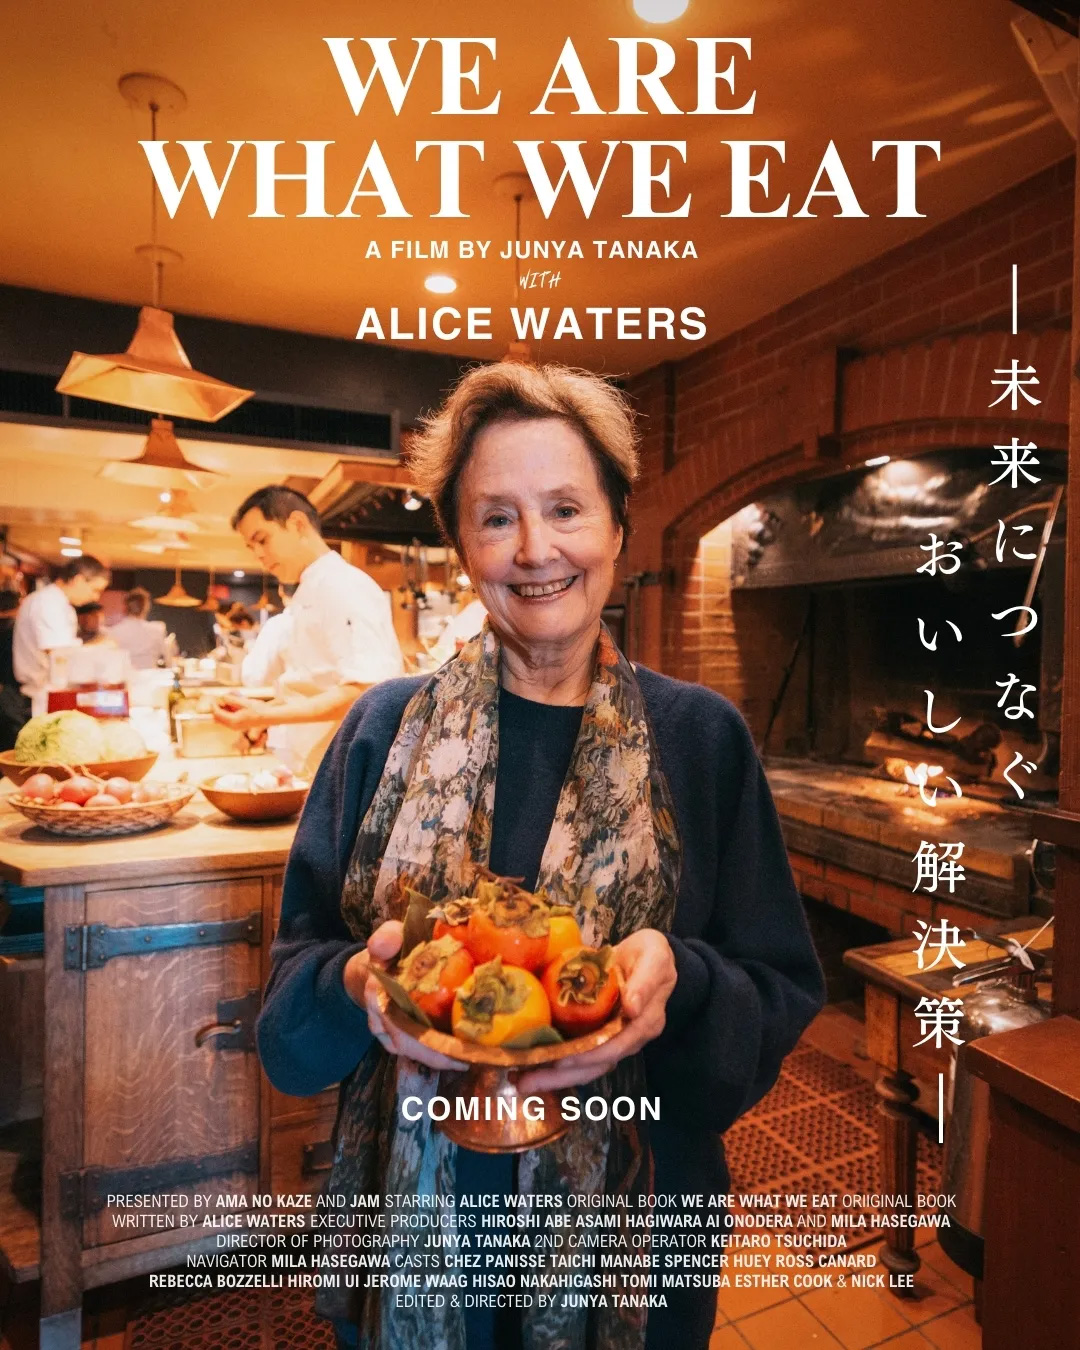 WE ARE WHAT WE EAT－未来につなぐ おいしい解決策－